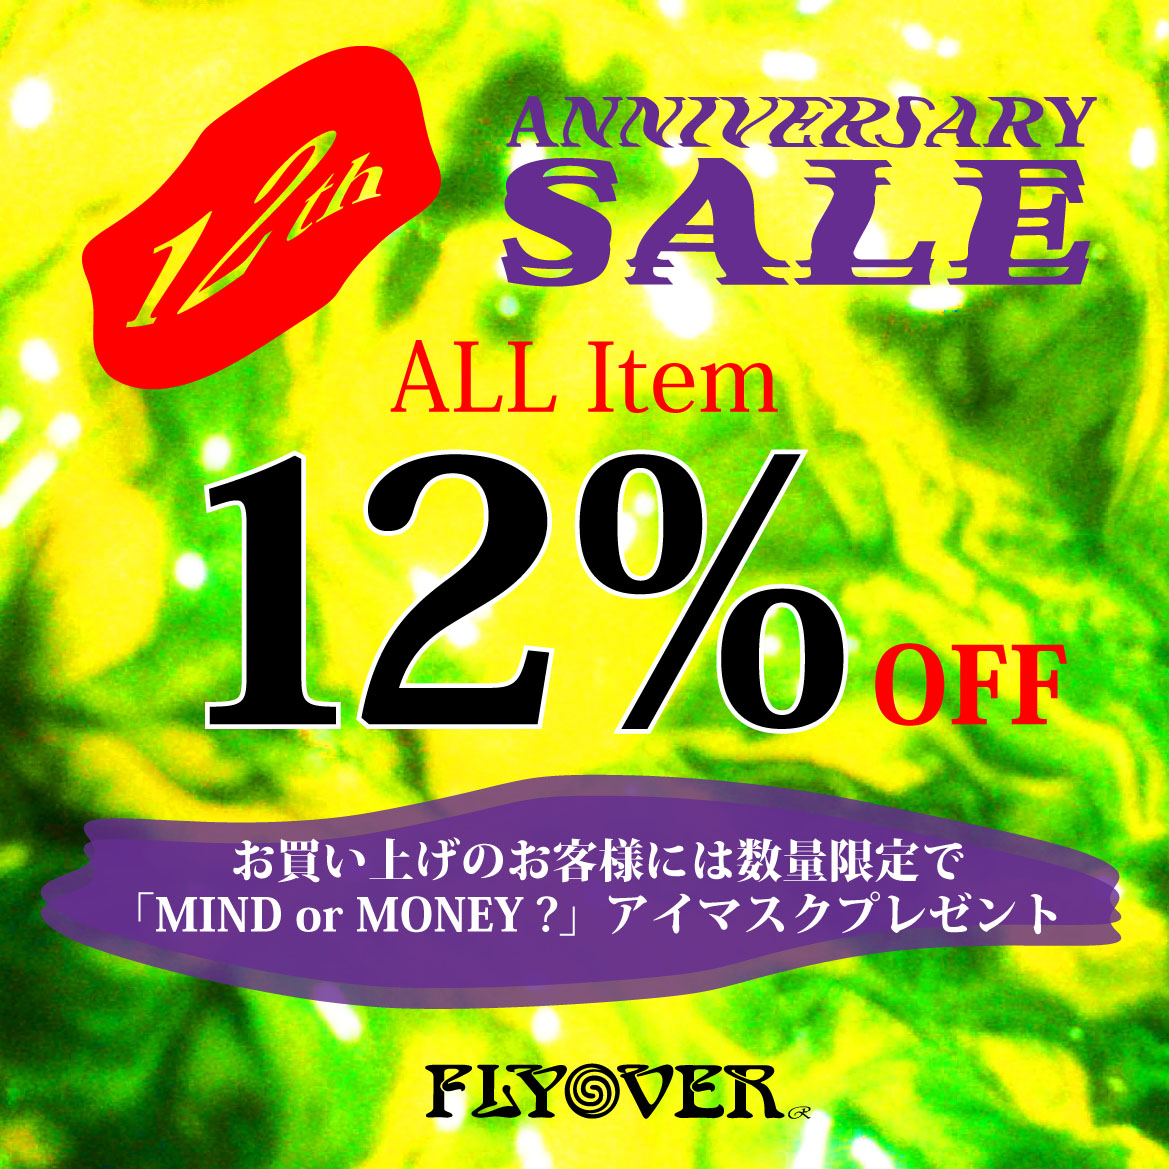 FLYOVER12周年記念 全品12%OFF SALE 3/8〜　実施いたします